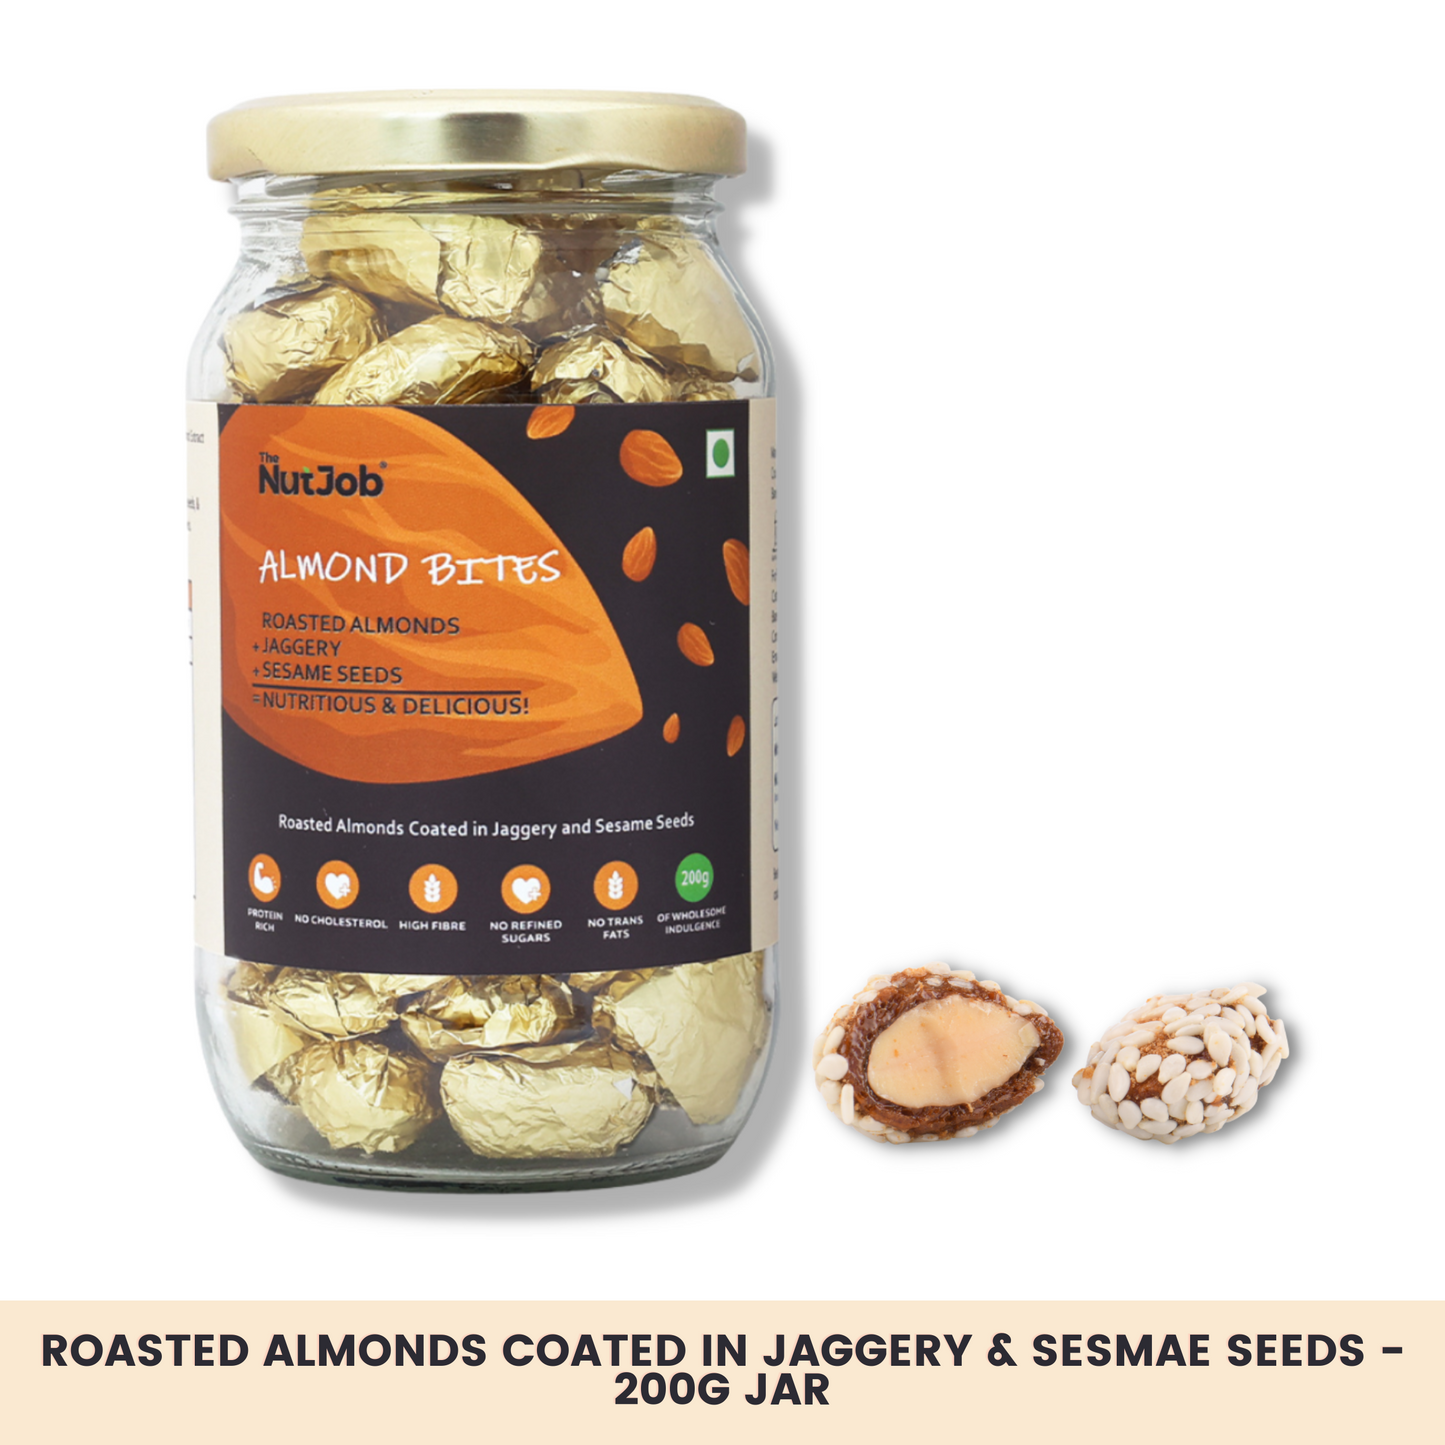 Almond Bites - Handcrafted Snack - 200g - Roasted Almonds, Jaggery and Sesame Seeds